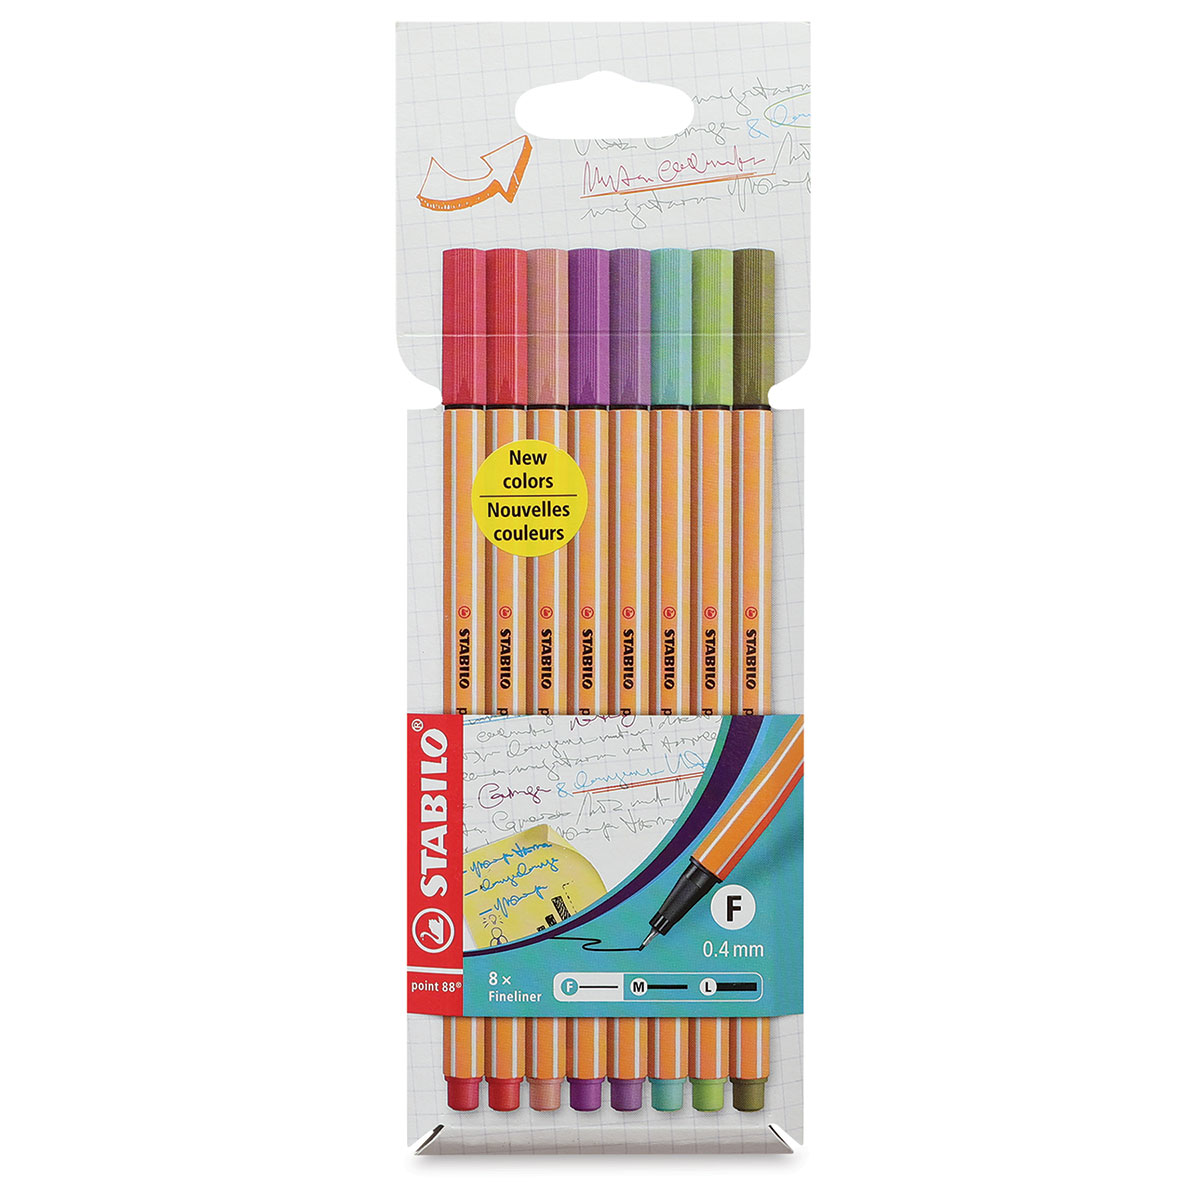 Stabilo Point 88 Fineliner and Sets | BLICK Art Materials